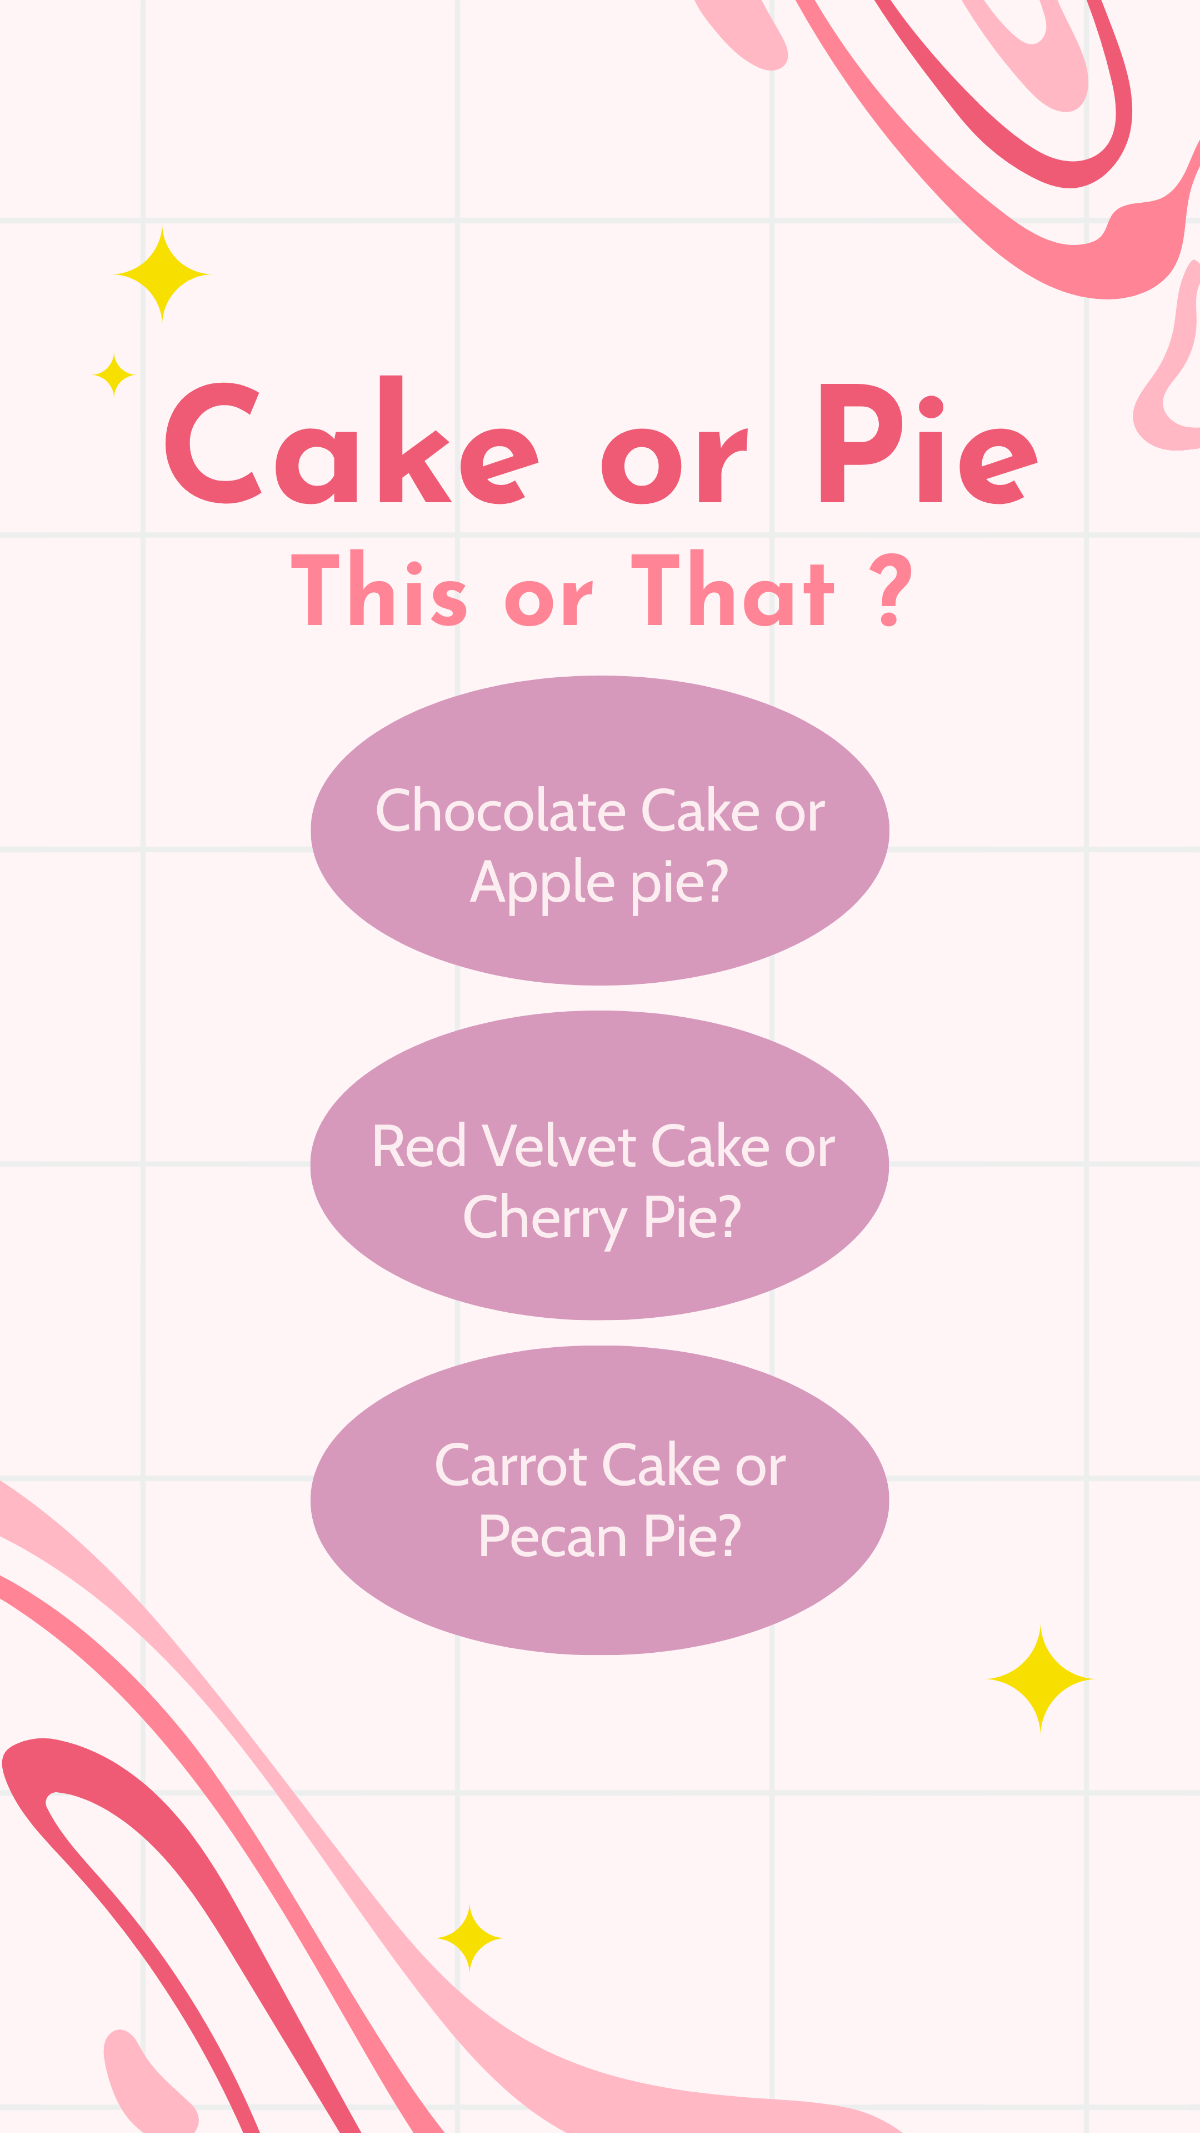 Cake or Pie This or That Instagram Story